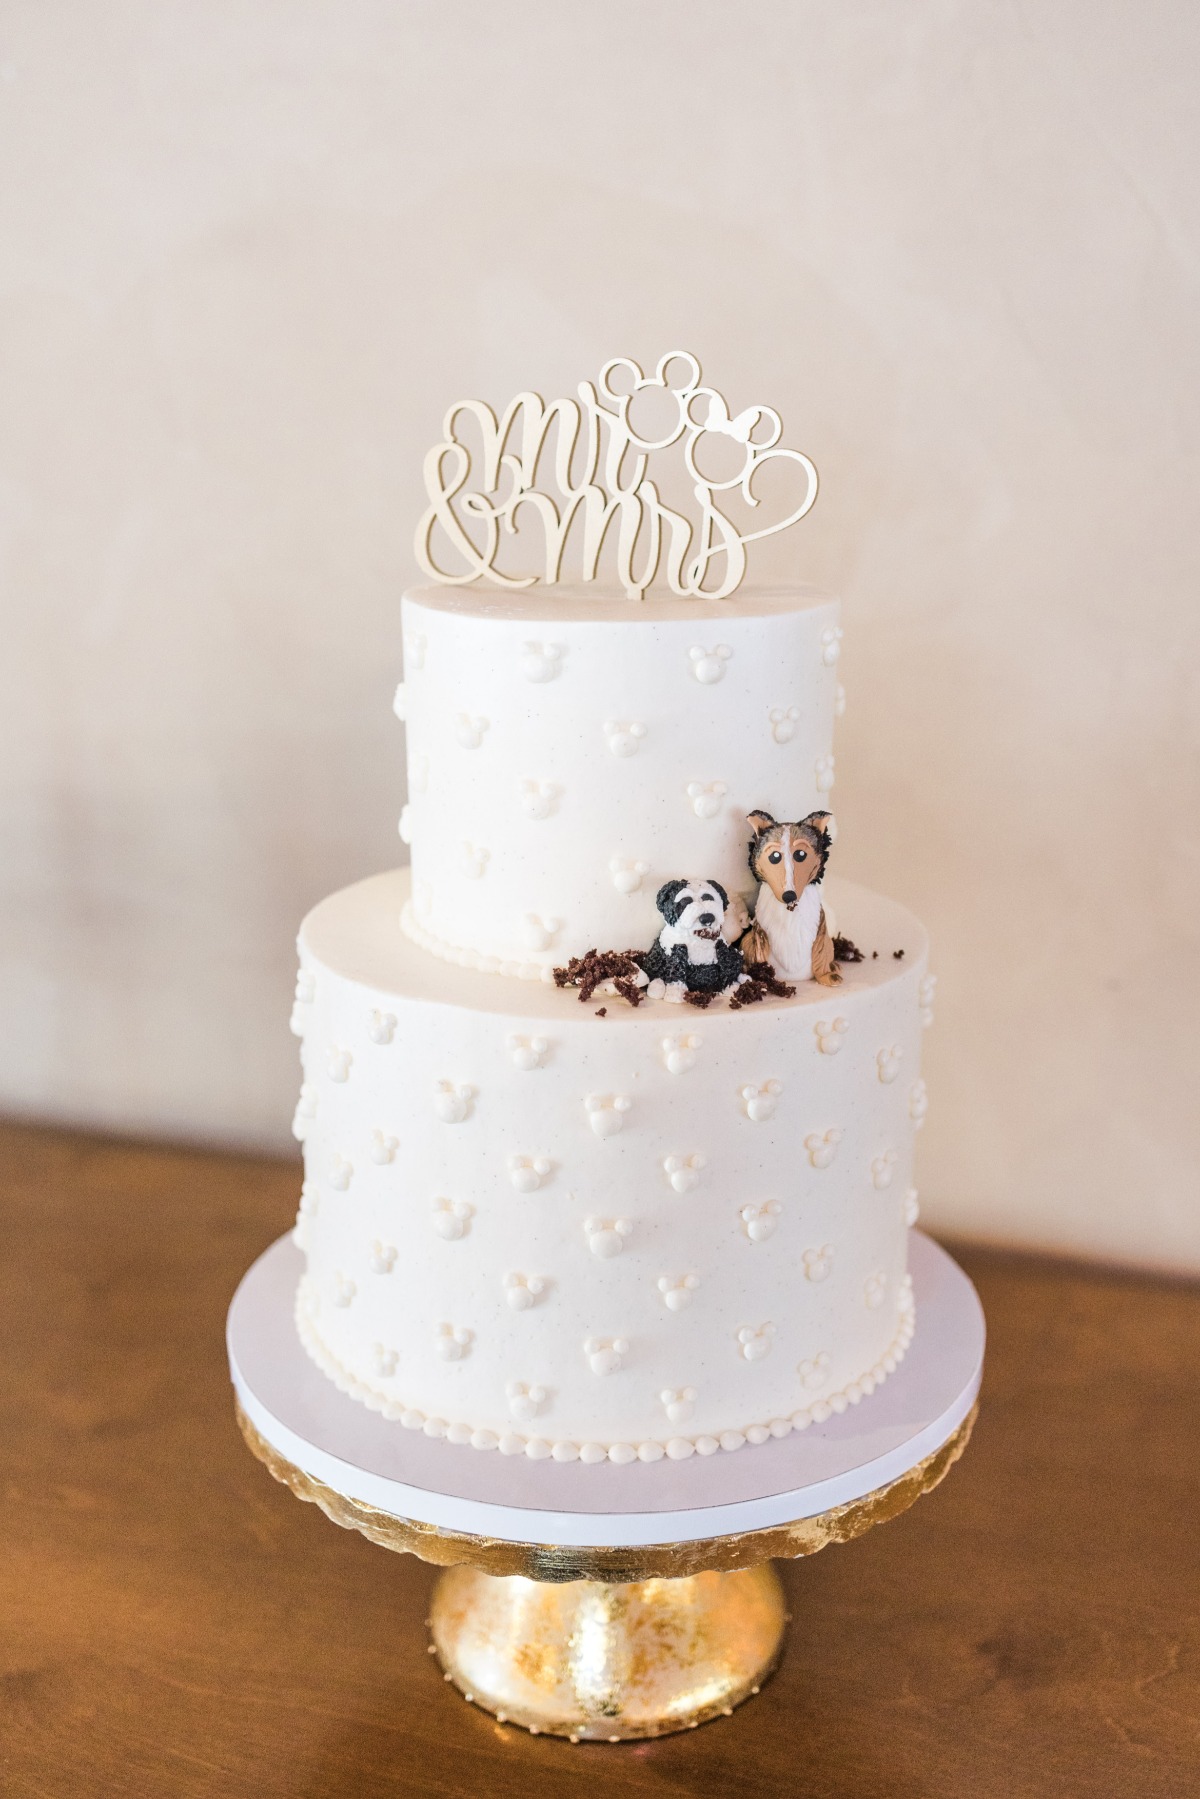 Disney Themed Wedding Cake With Dogs